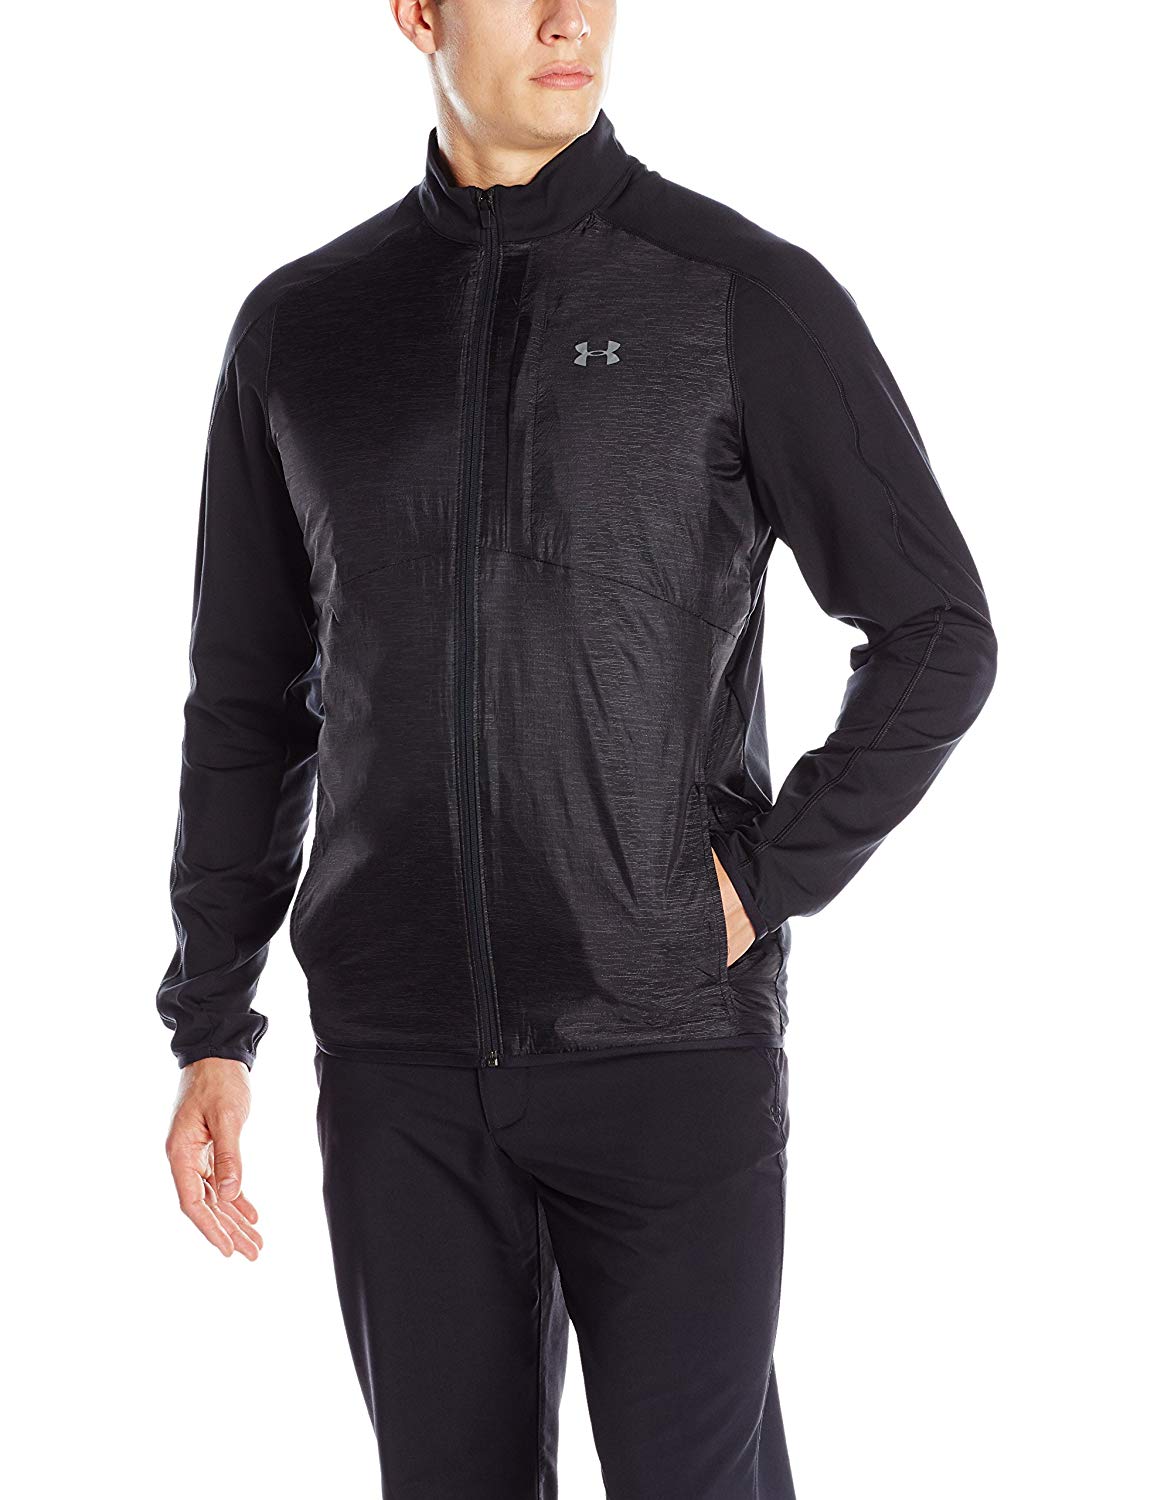 Mens Under Armour Storm ColdGear Infrared Insulated Golf Jackets